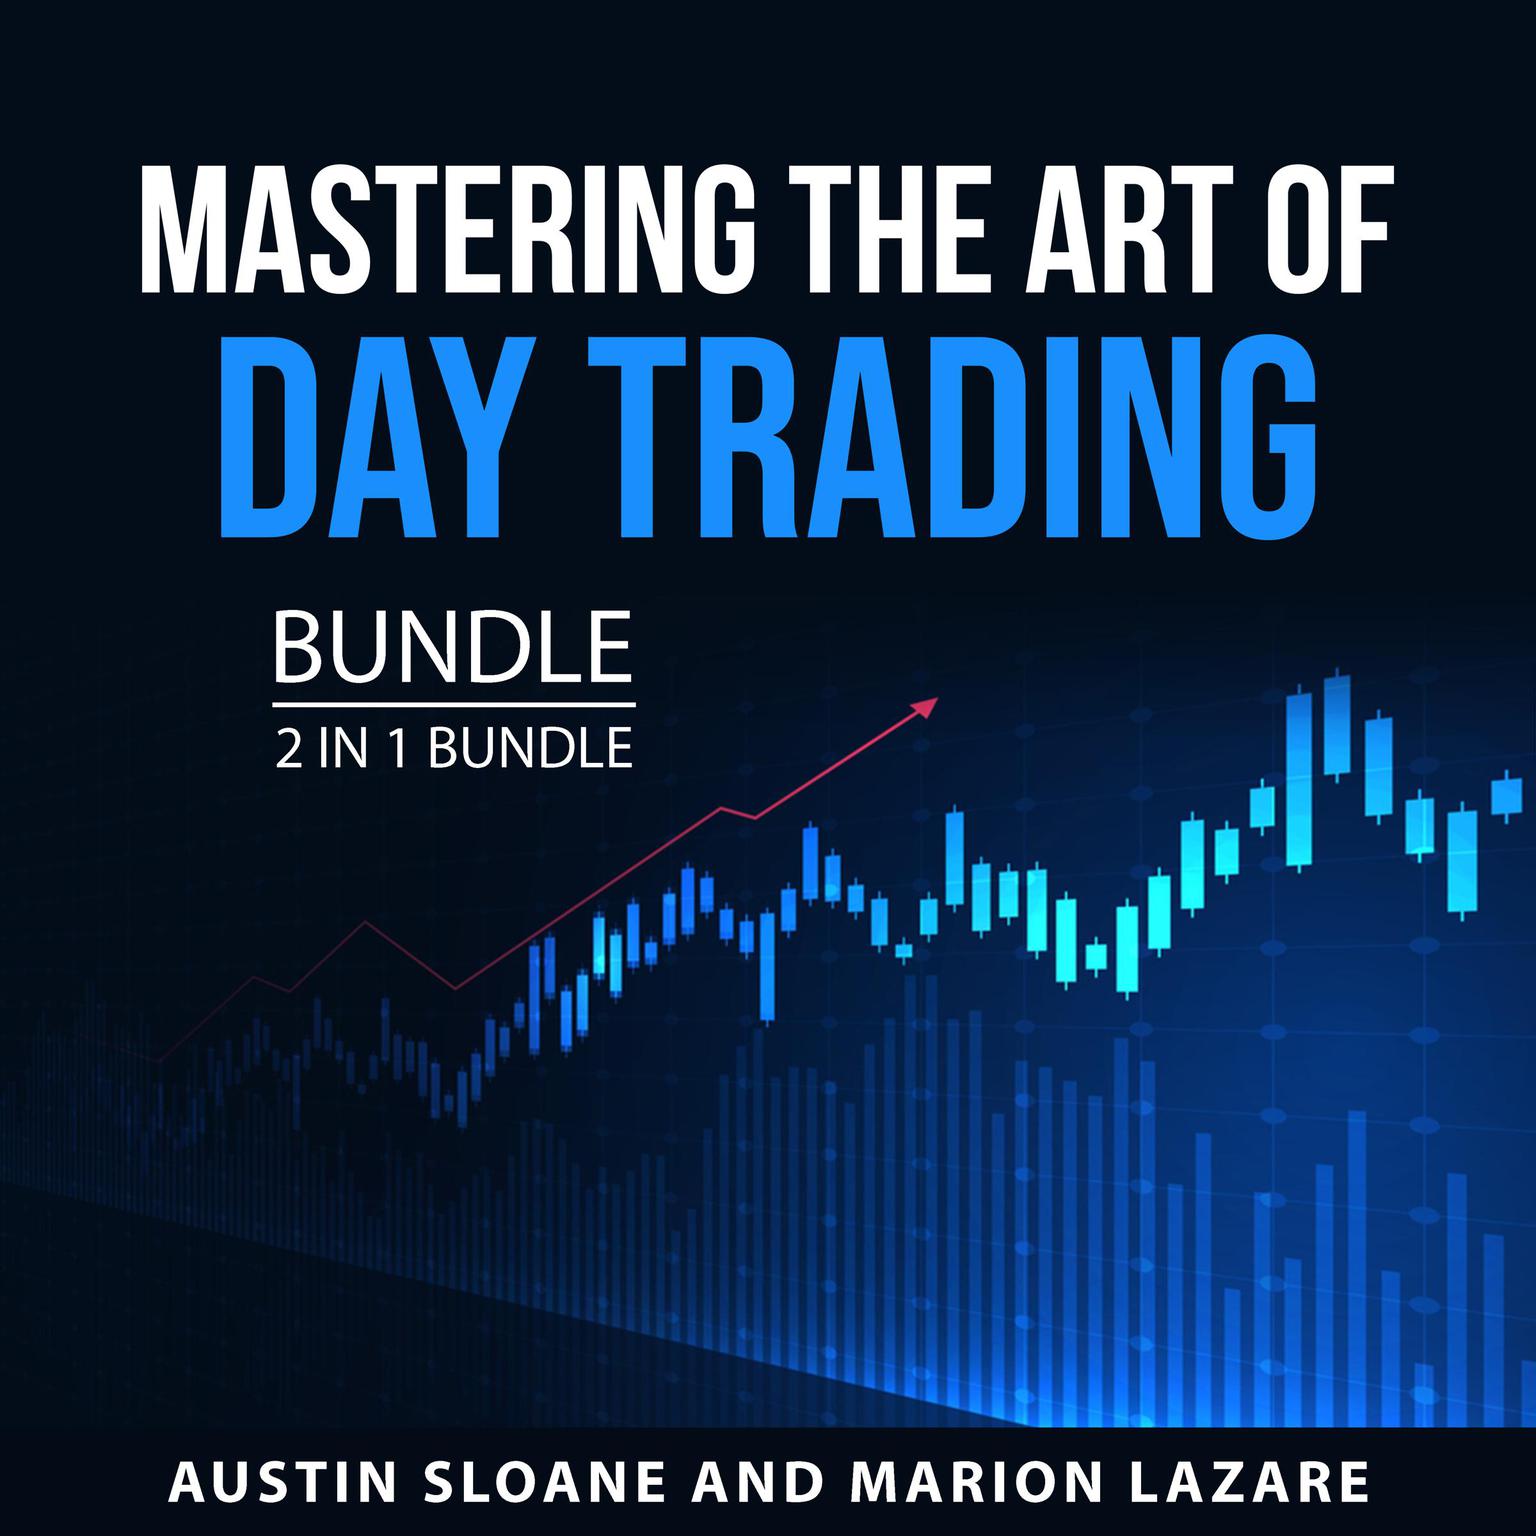 Mastering the Art of Day Trading Bundle, 2 in 1 Bundle Audiobook, by Austin Sloane